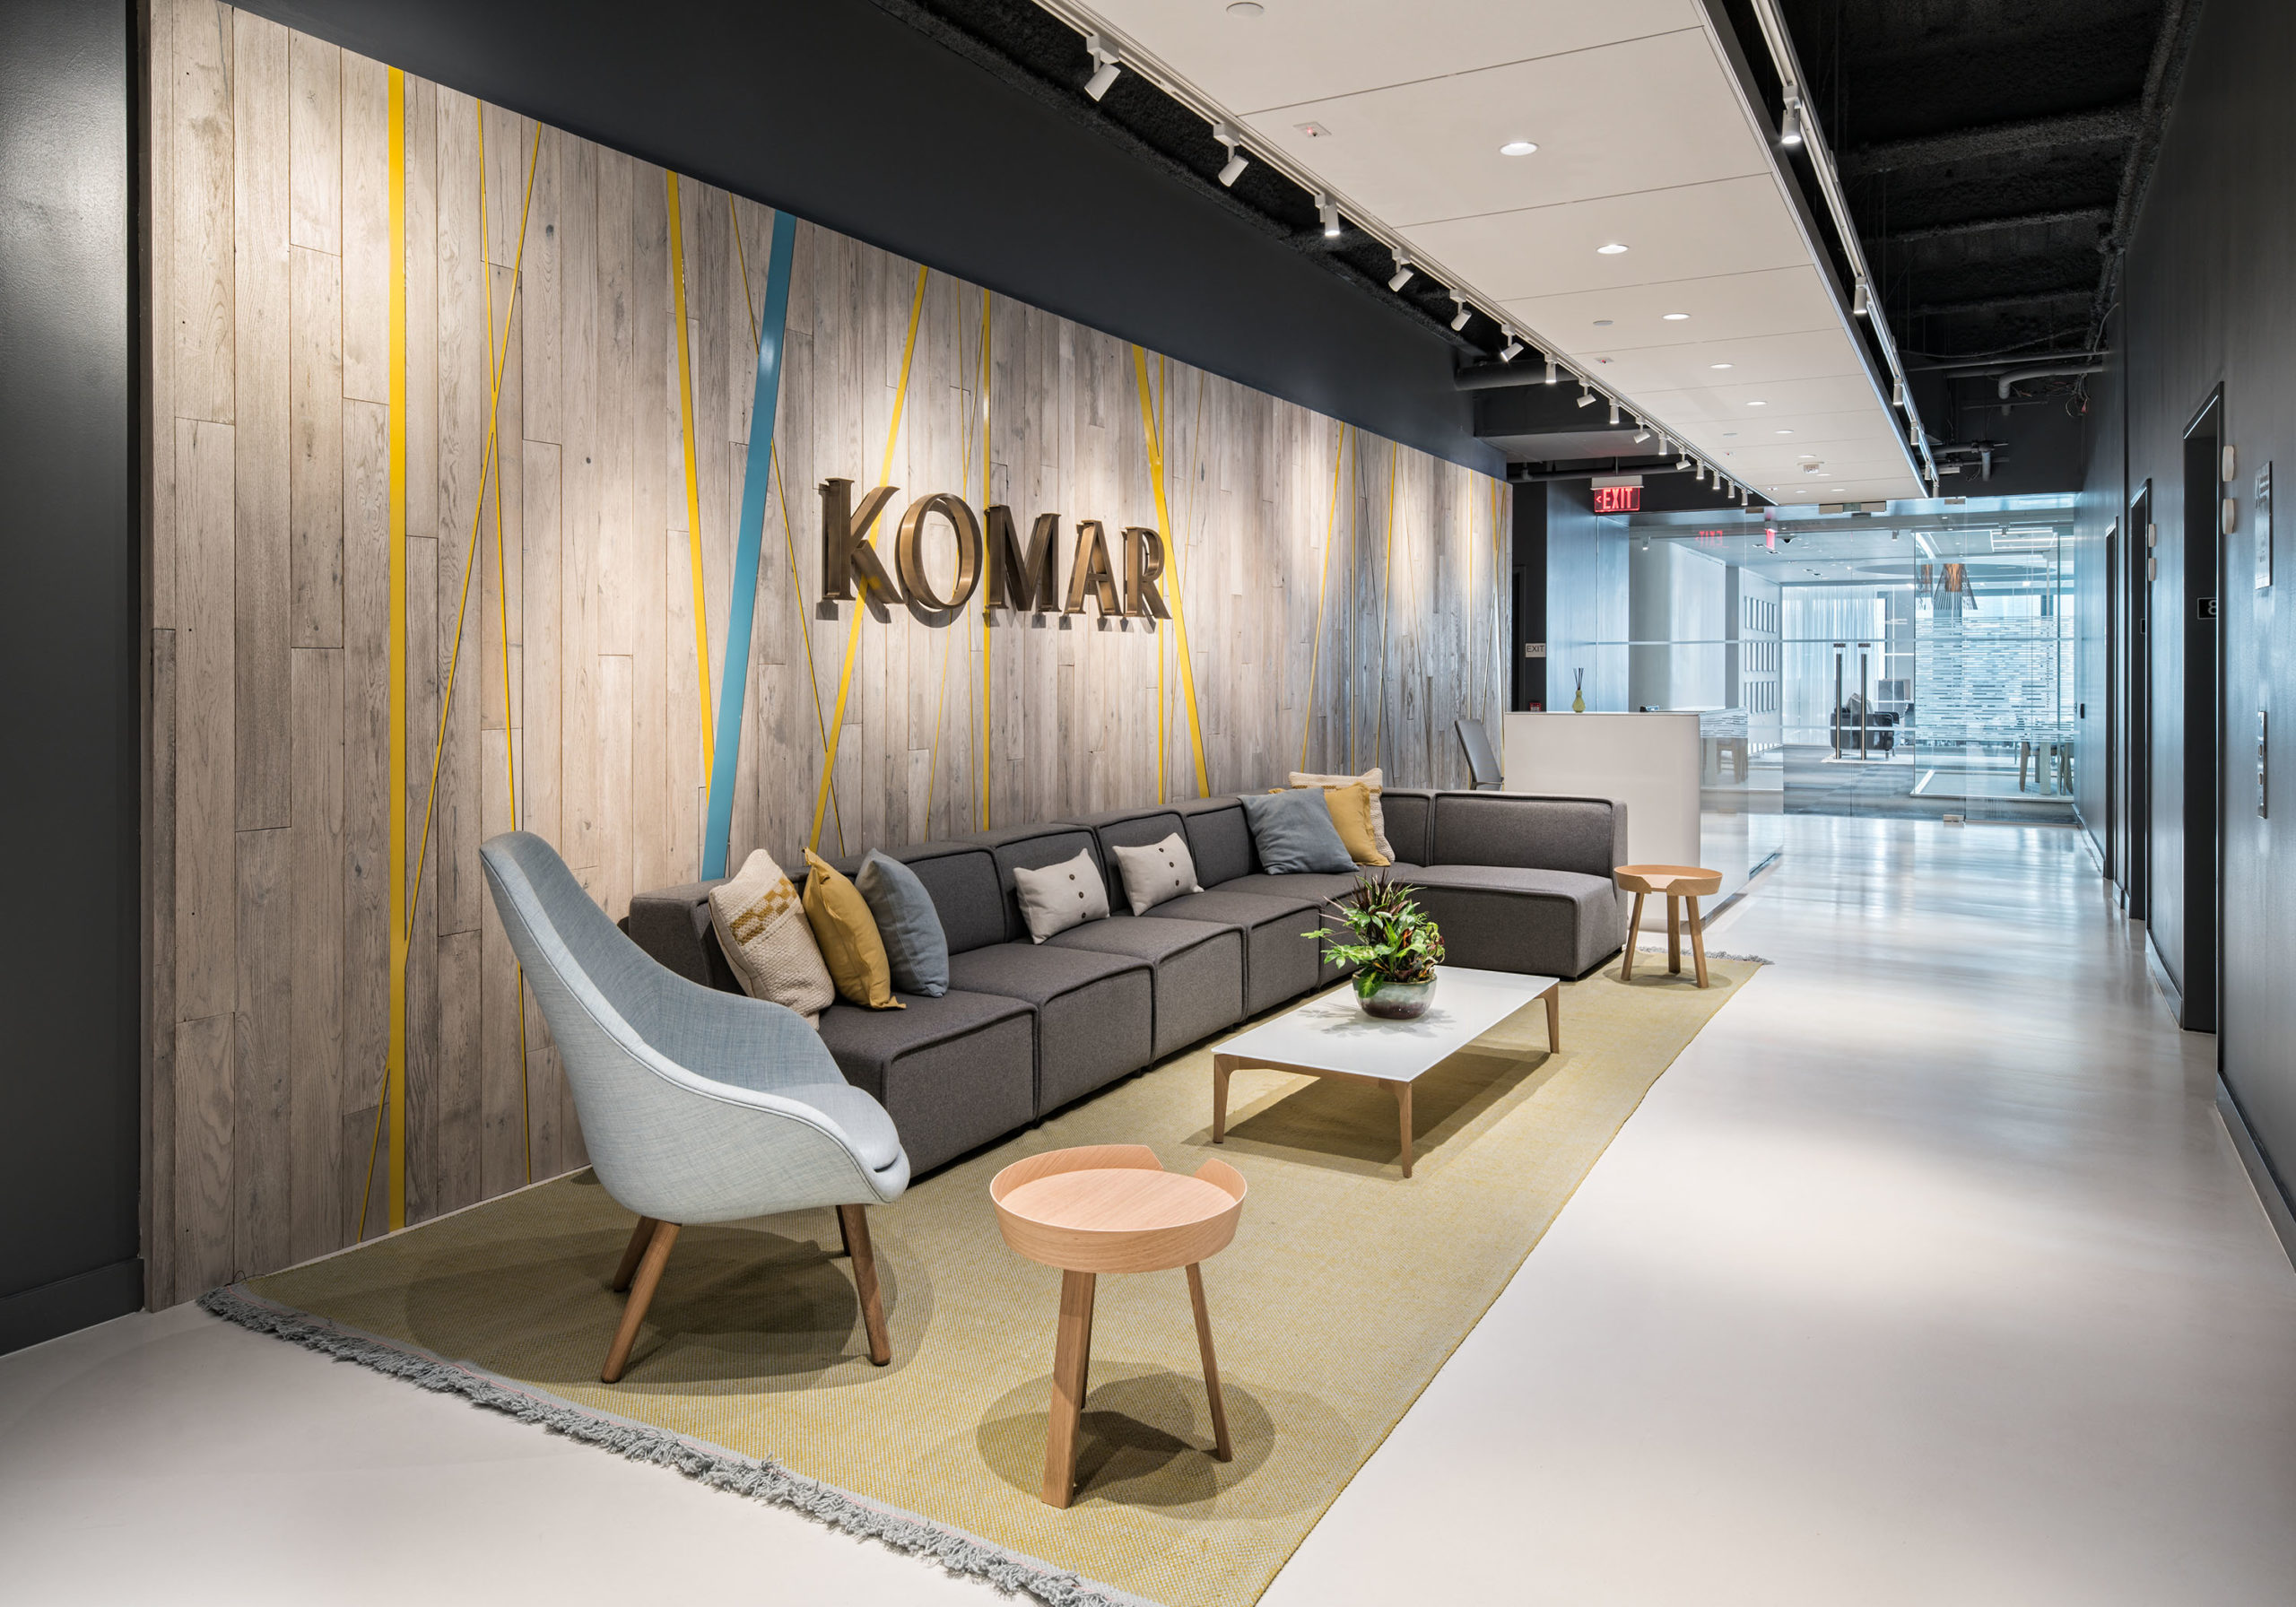 waiting area at komar headquarters in jersey city